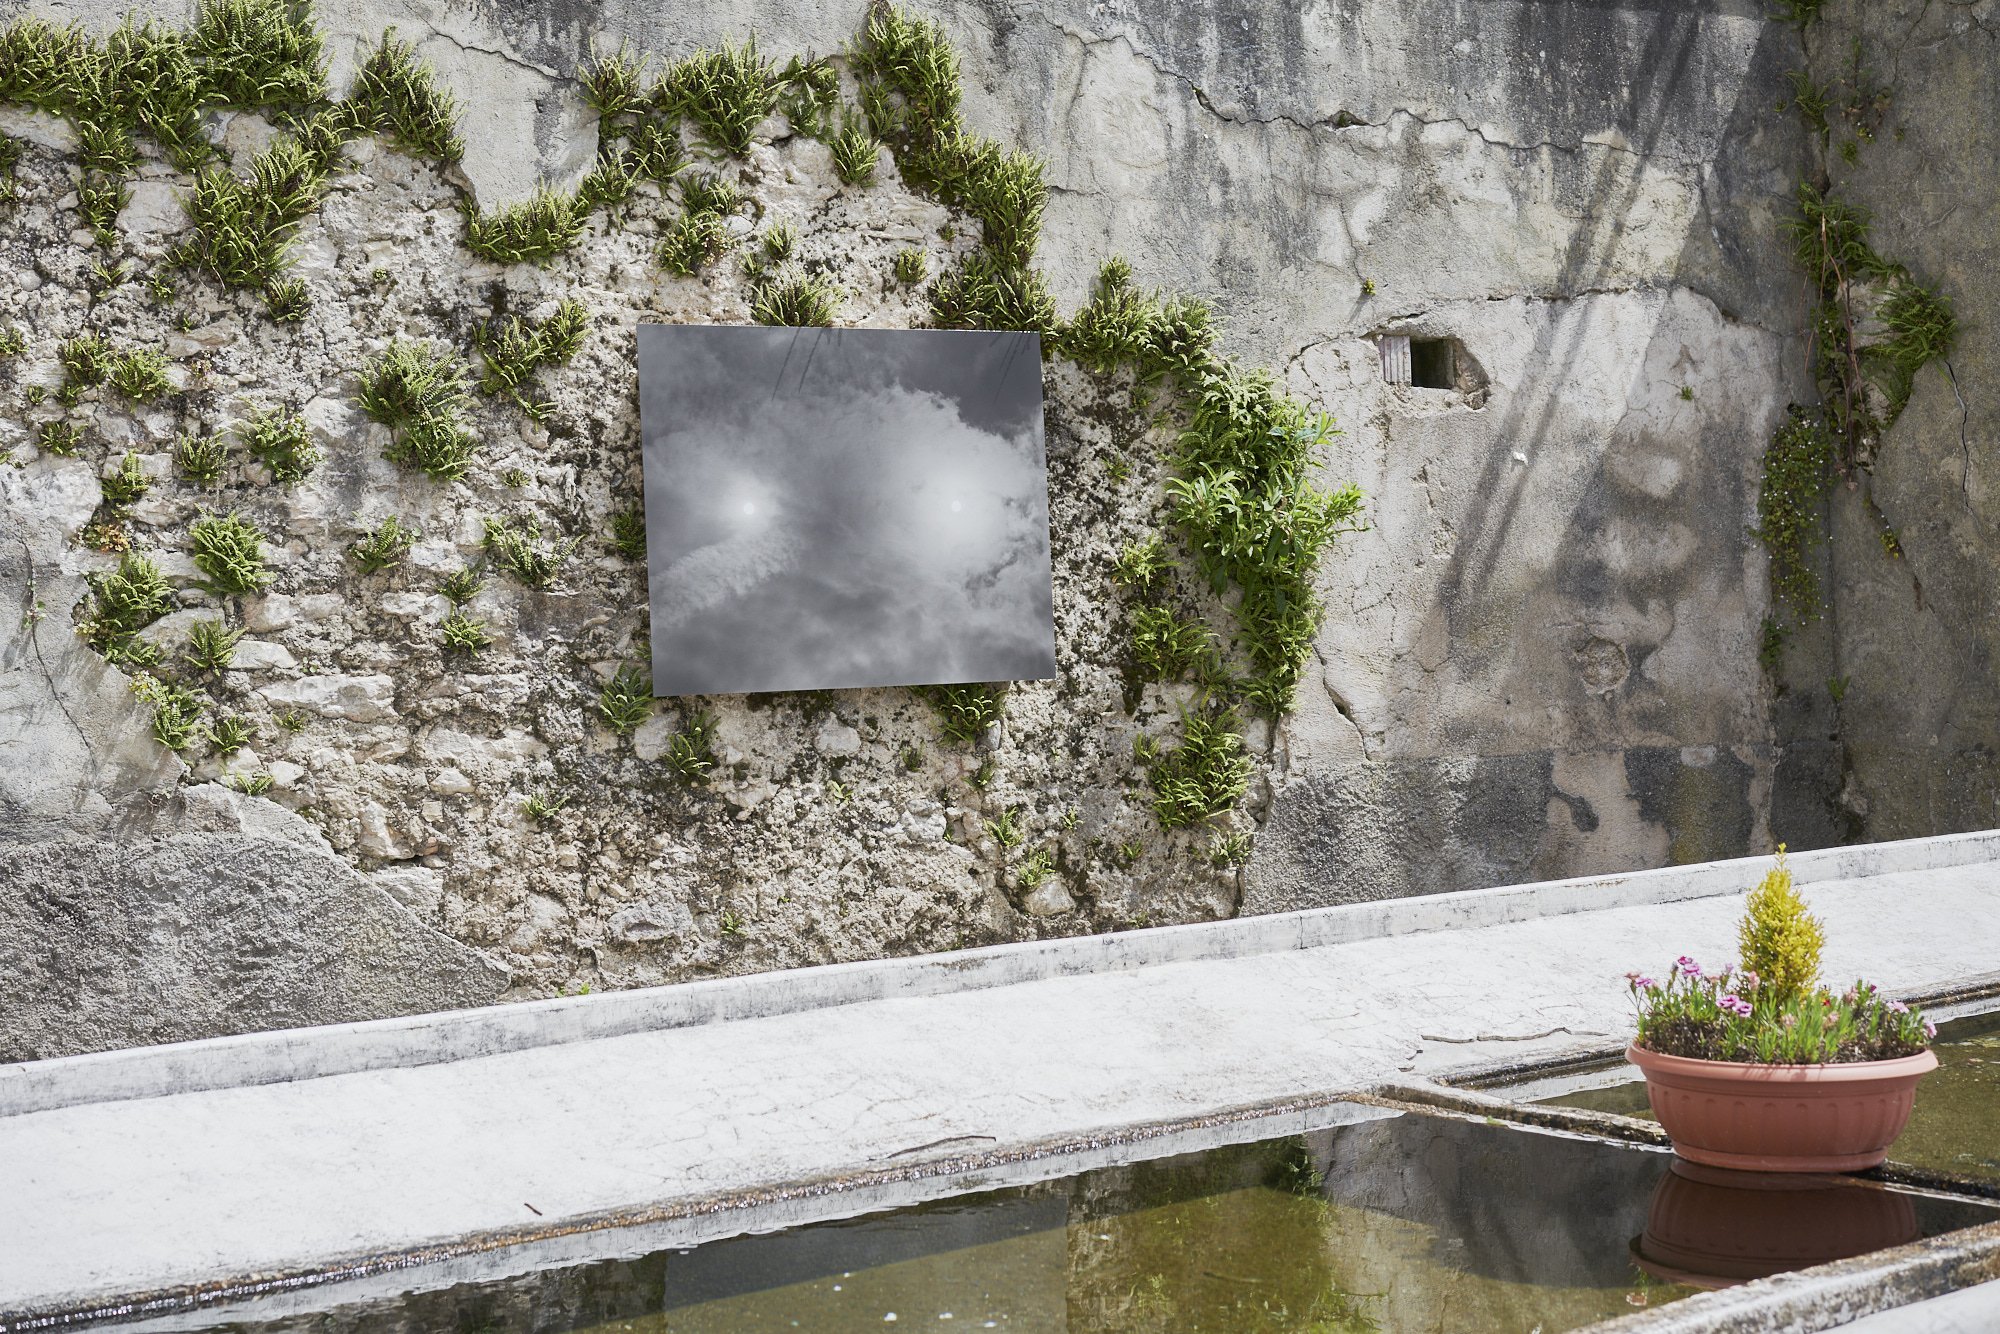   Morning, Afternoon #4 , 2023. Installed in Pieve Tesino, IT, as part of Una Boccata d’Arte 2023, a project by Fondazione Elpis in collaboration with Galleria Continua. Curated by Valerio Panella.  